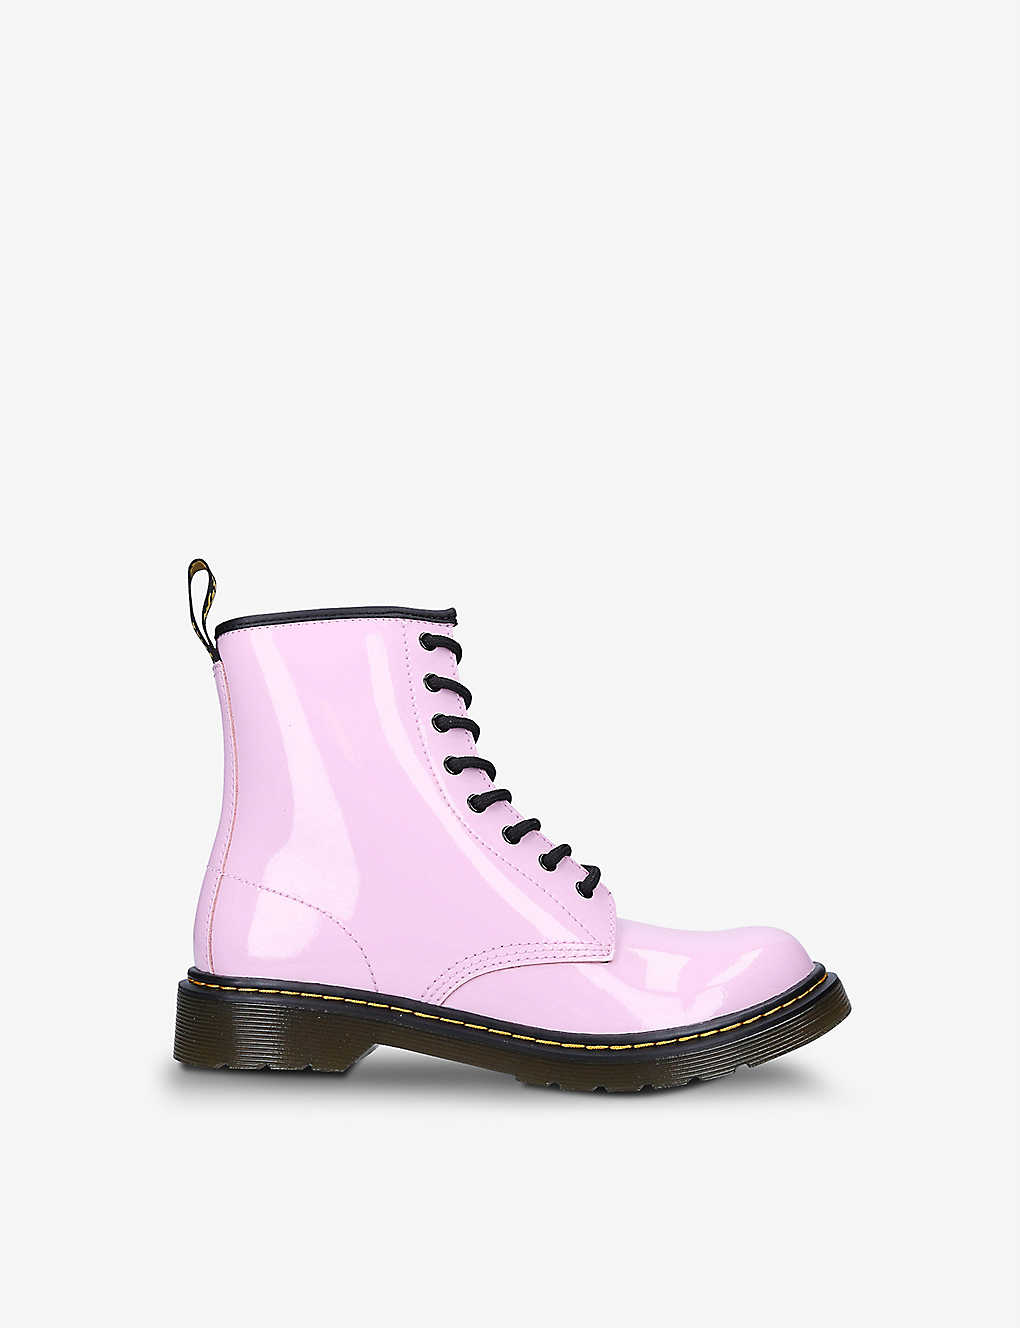 Shop Dr. Martens' Dr Martens Girls Pale Pink Kids 1460 8-eye Leather Boots 6 Months-3 Years